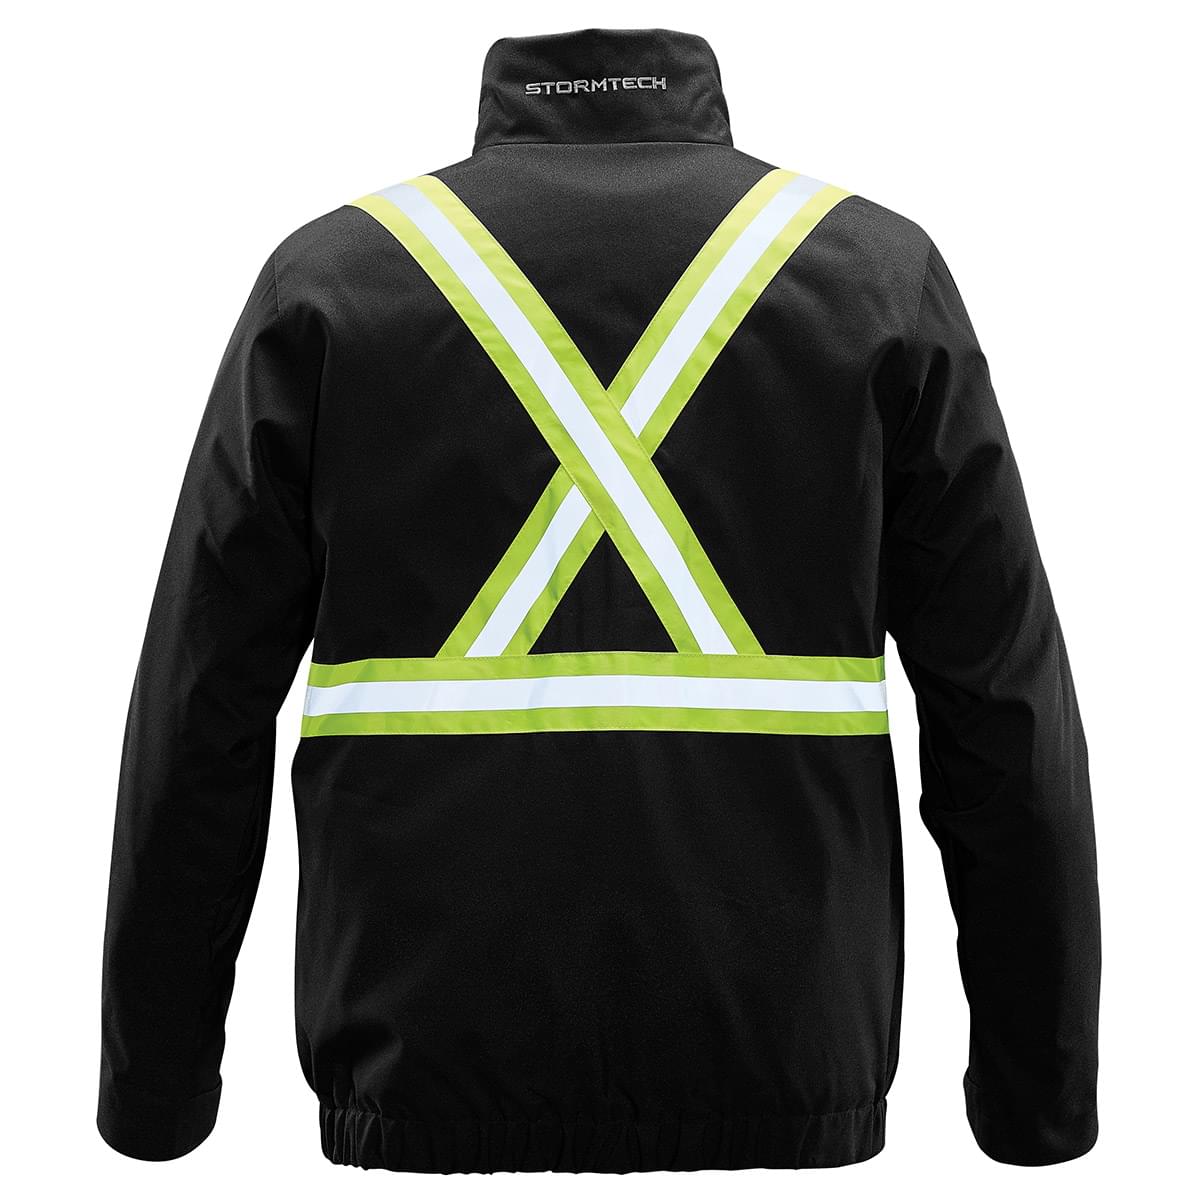 Unisex HD 3-in-1 Reflective Jacket - Stormtech Canada Retail